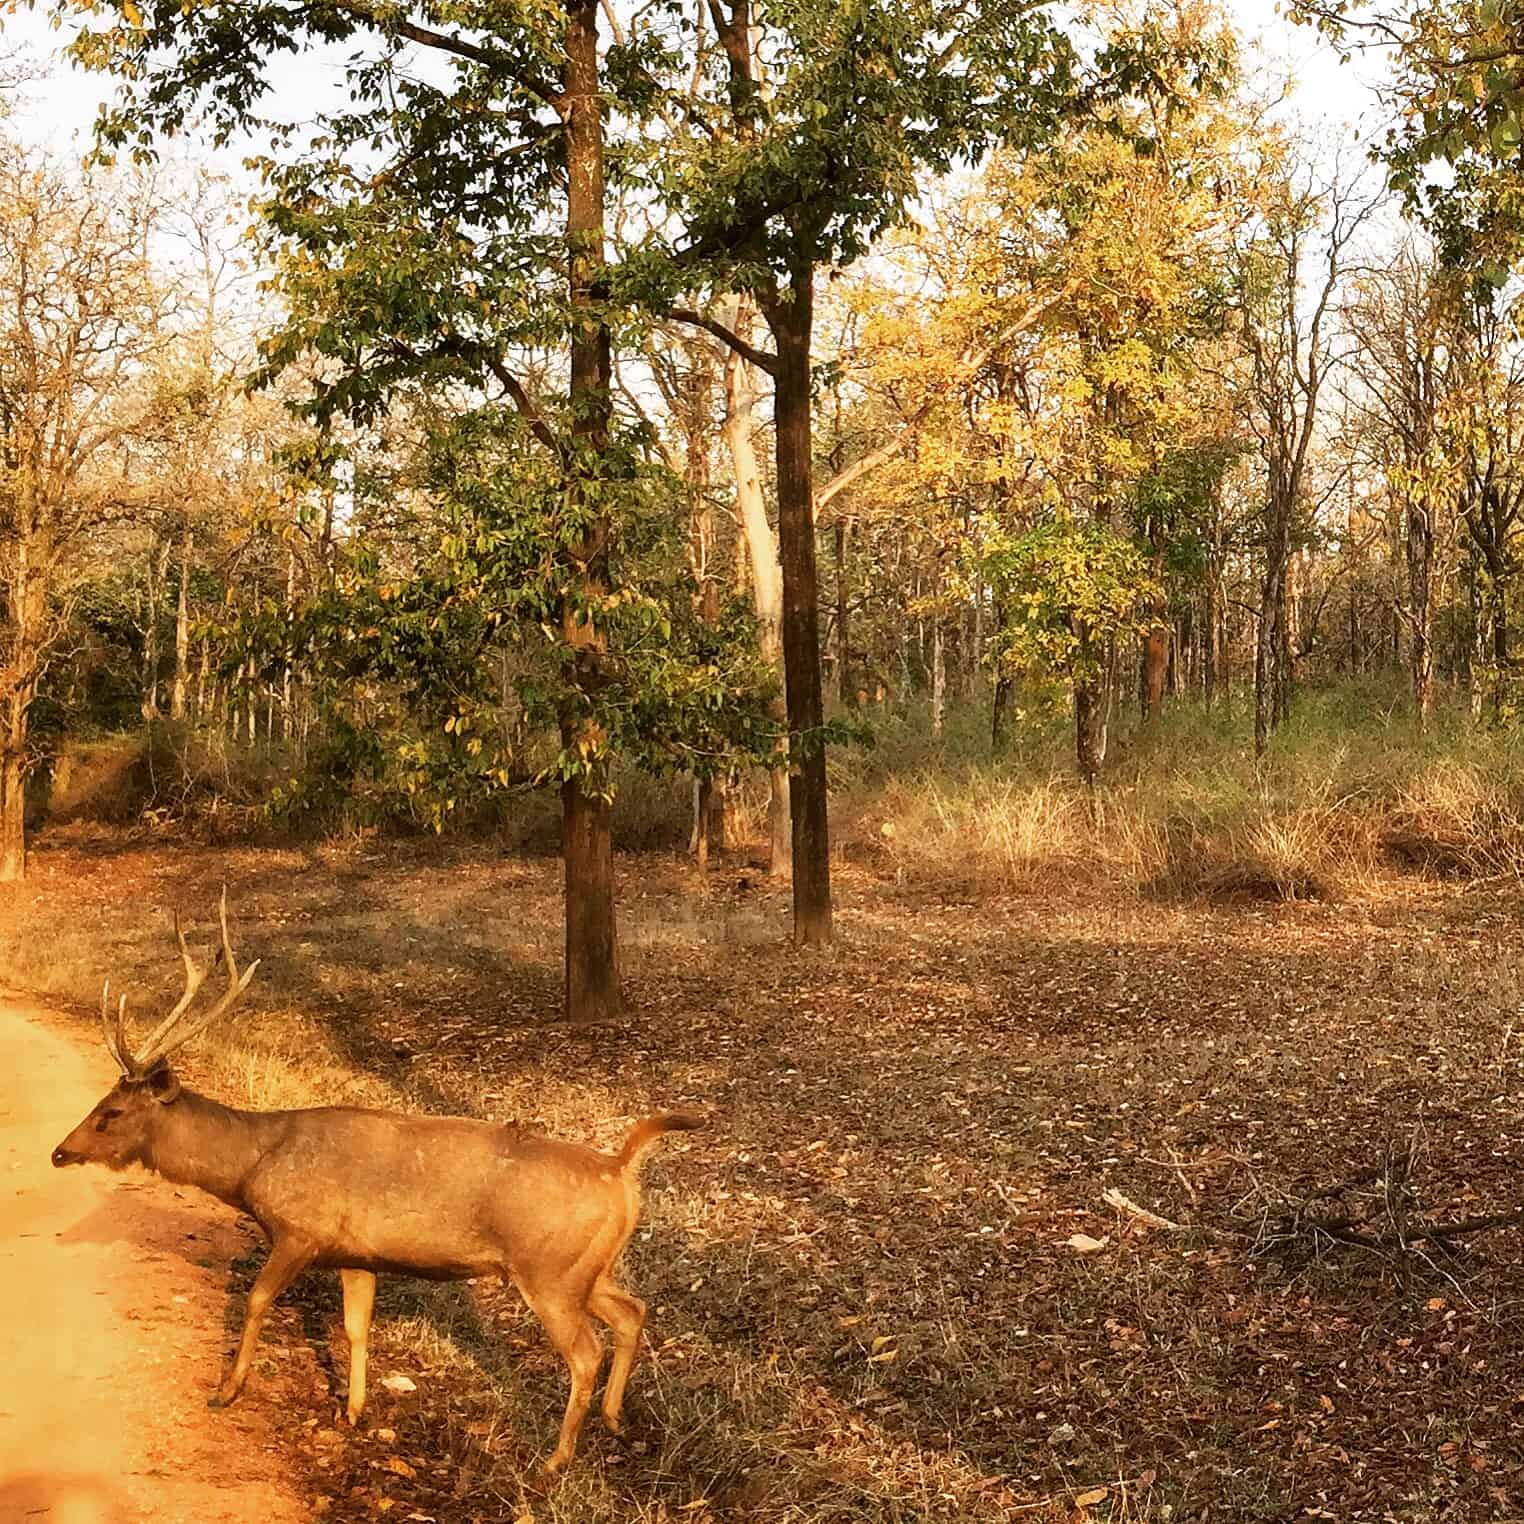 Pench national park, Pench tiger reserve